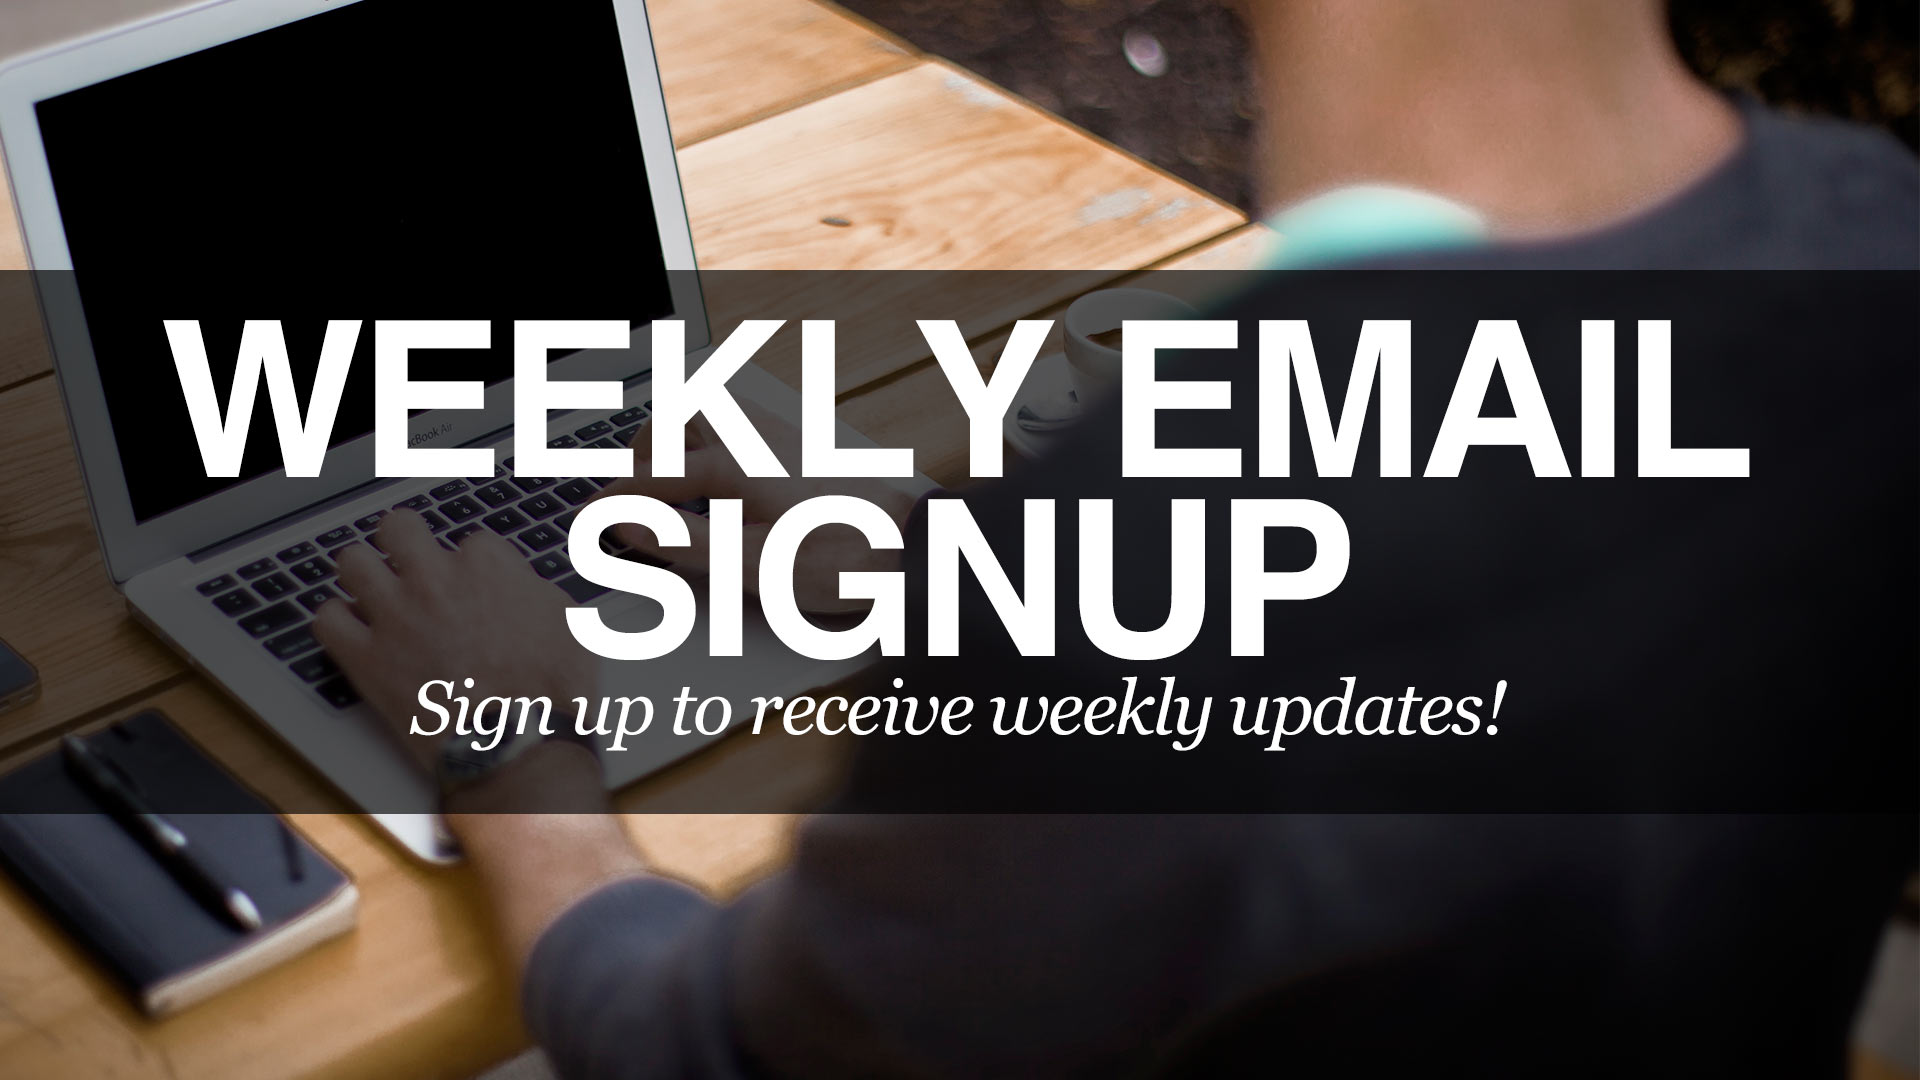 08.27.15-Email-Signup.jpg